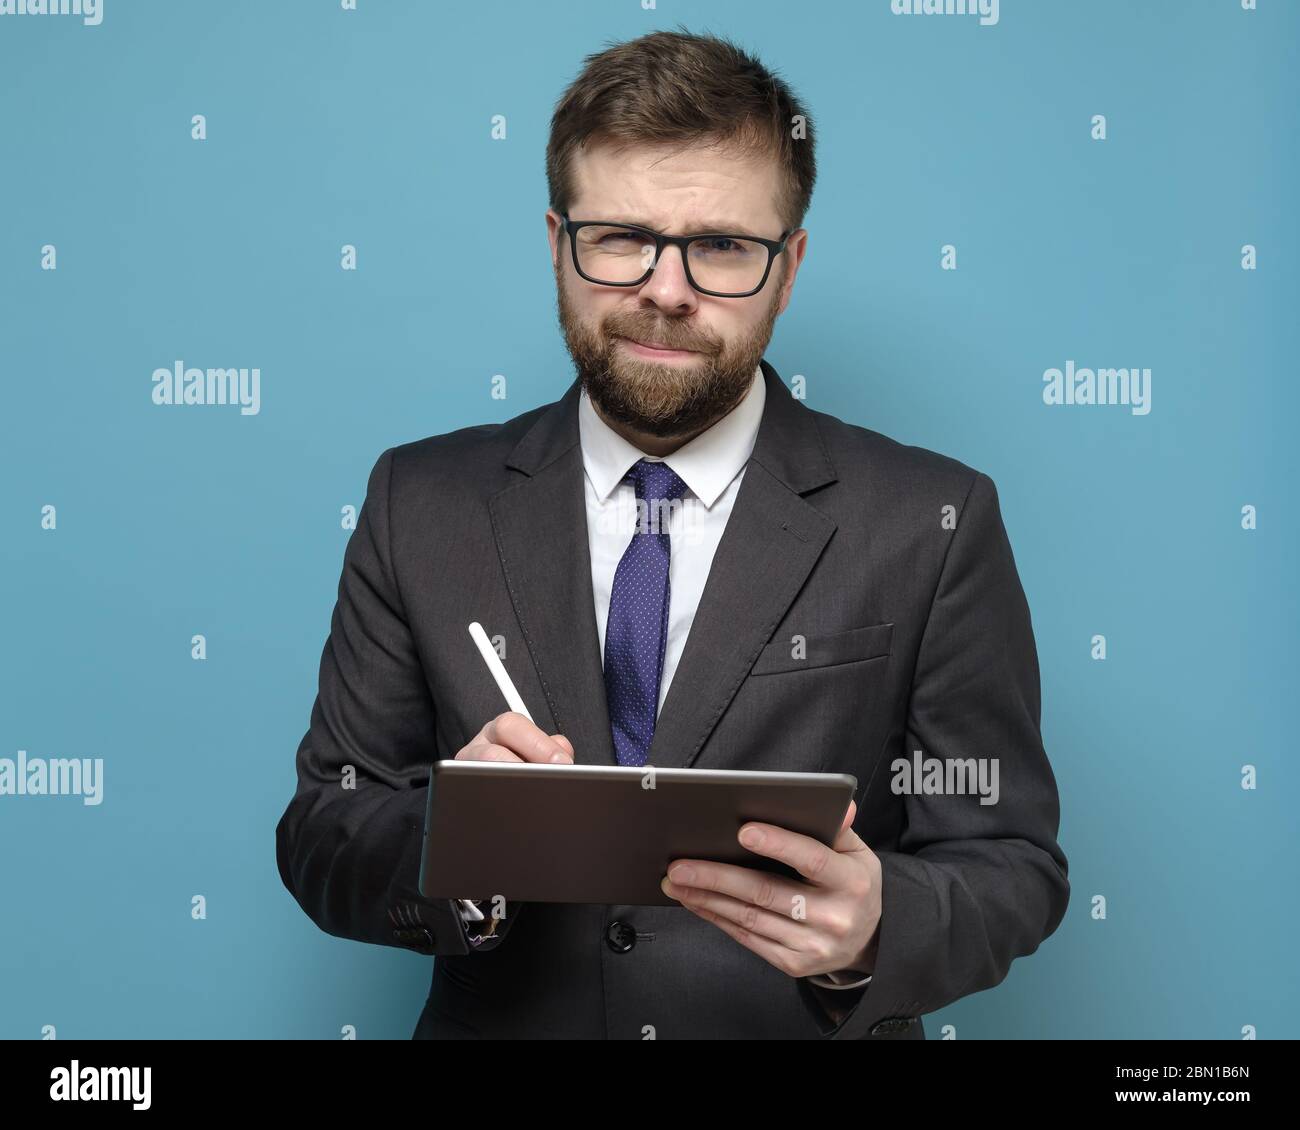 Bewildered businessman in a suit works with a tablet and stylus and looks thoughtfully at the camera with squinted eyes. Stock Photo